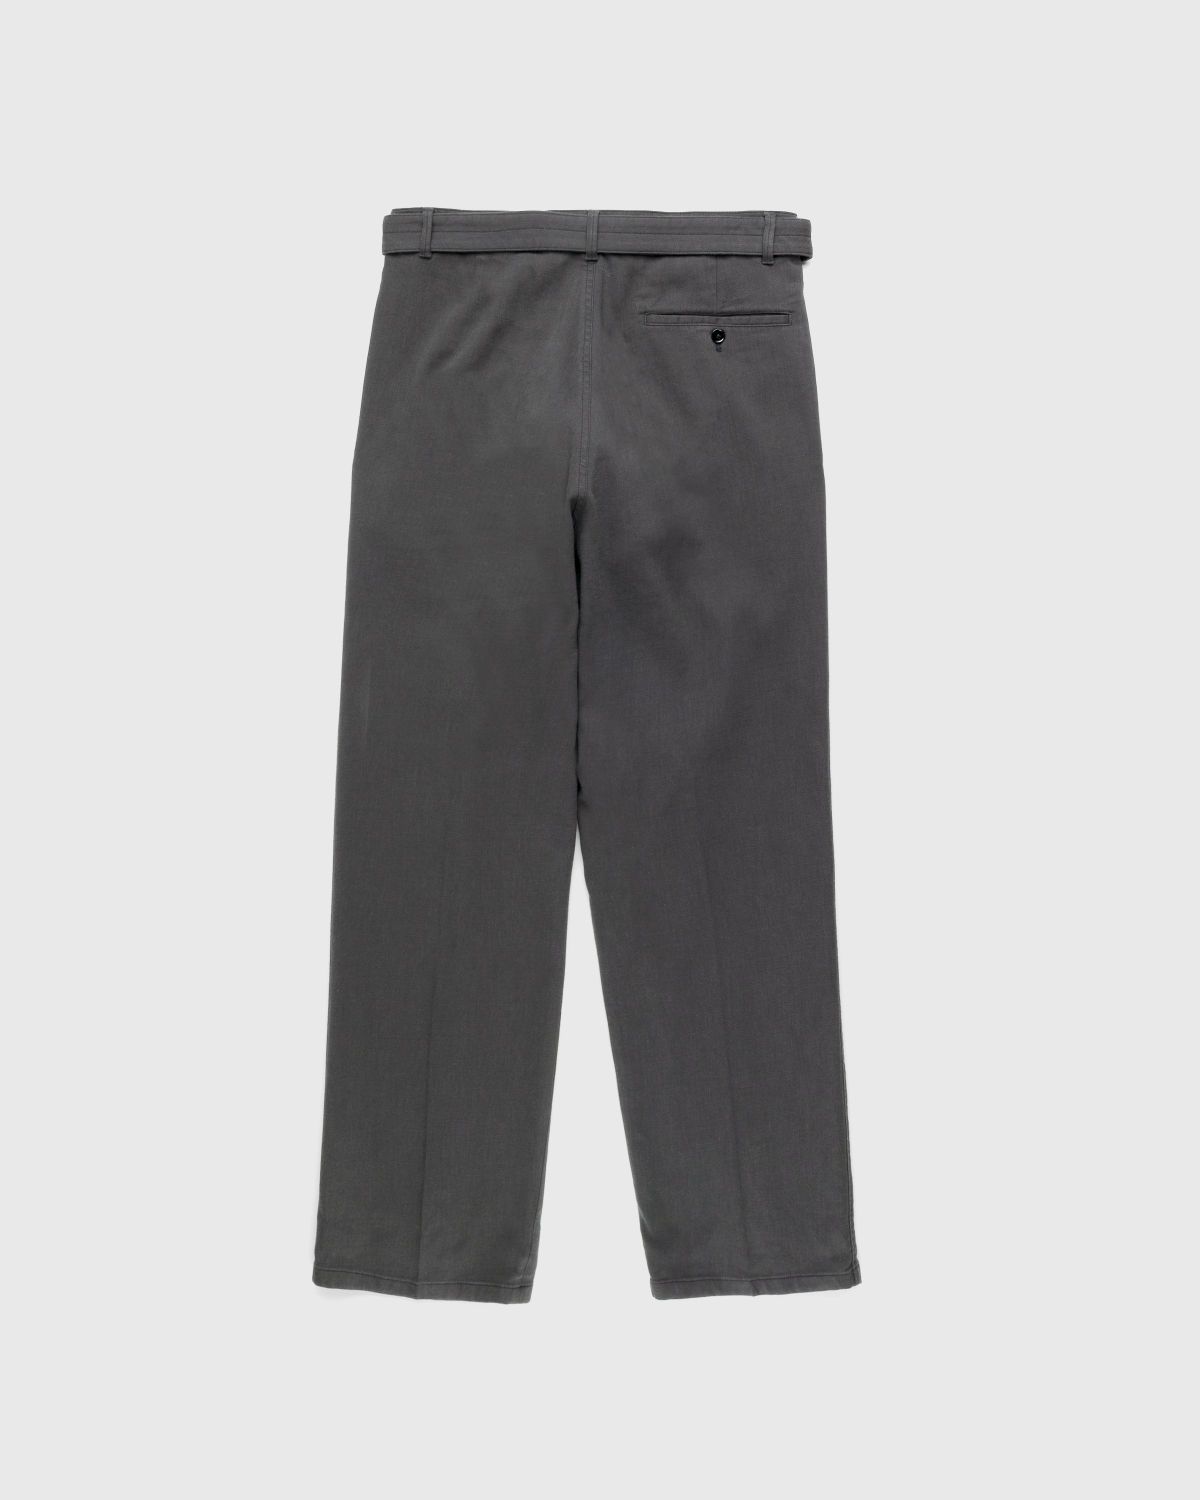 Lemaire – Loose Pleated Pants Grey - Pants - Brown - Image 2